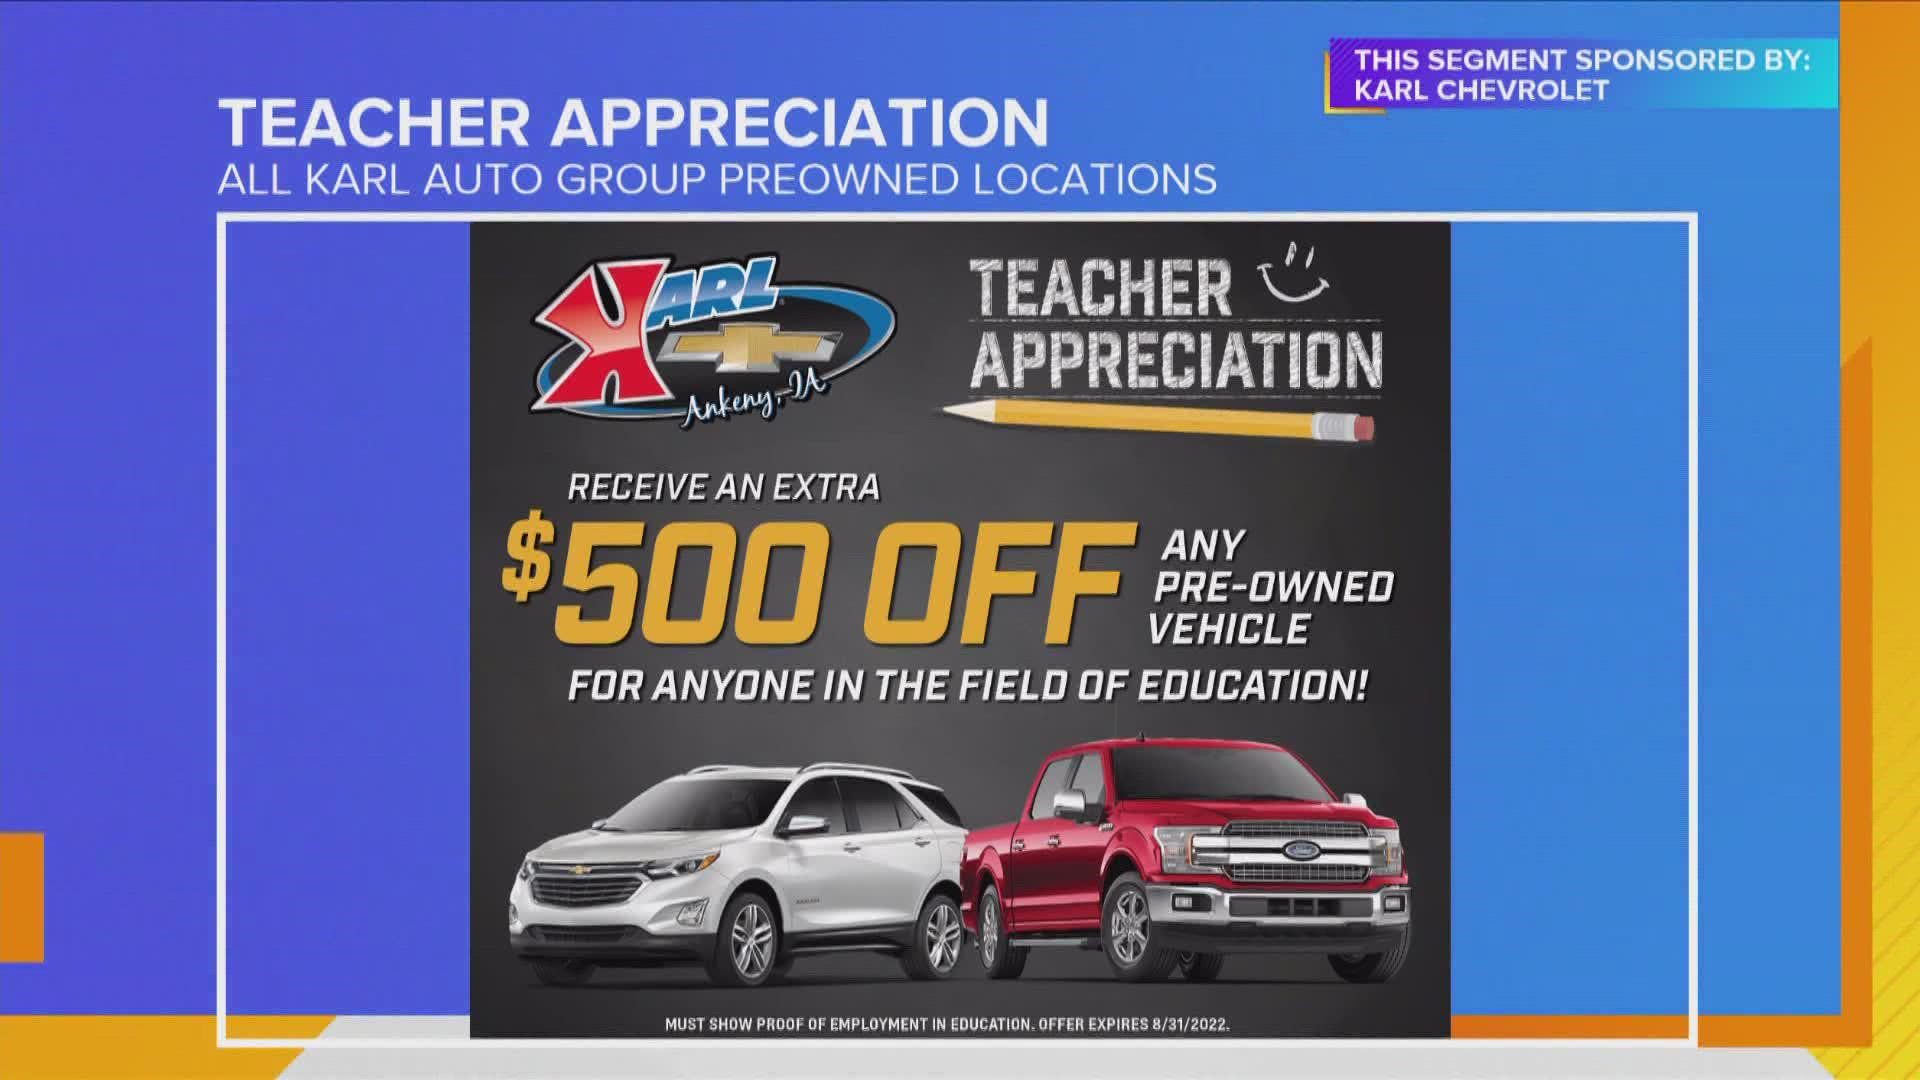 Bret Moyer has information that offers EDUCATORS an ADDITIONAL $500 OFF any pre-owned vehicle at any of the Karl Auto Group locations across the state | Paid Content